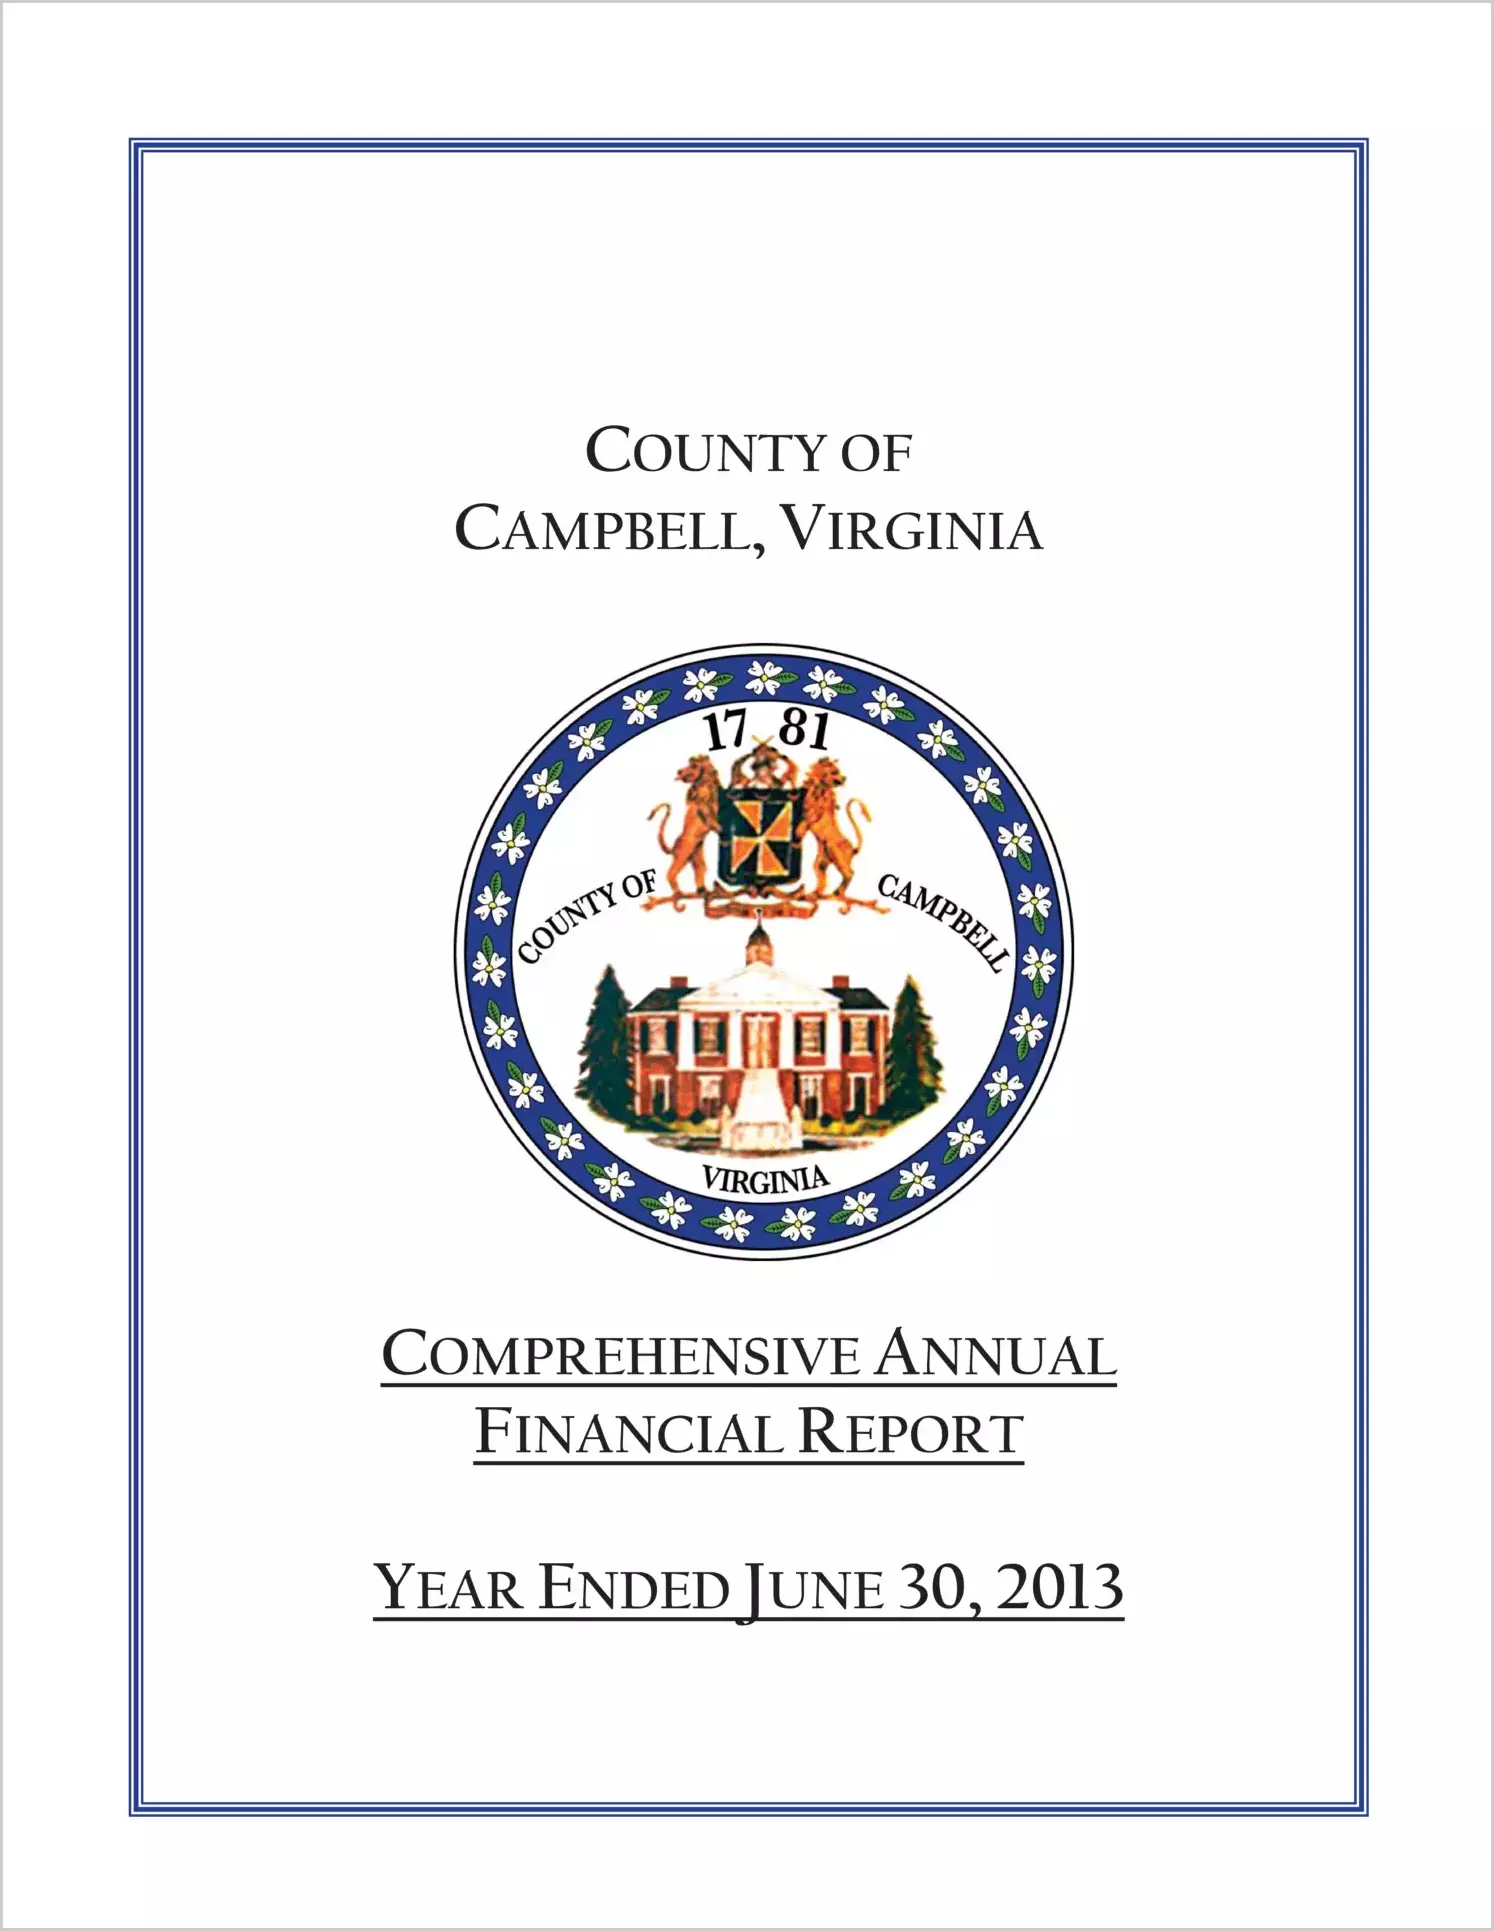 2013 Annual Financial Report for County of Campbell